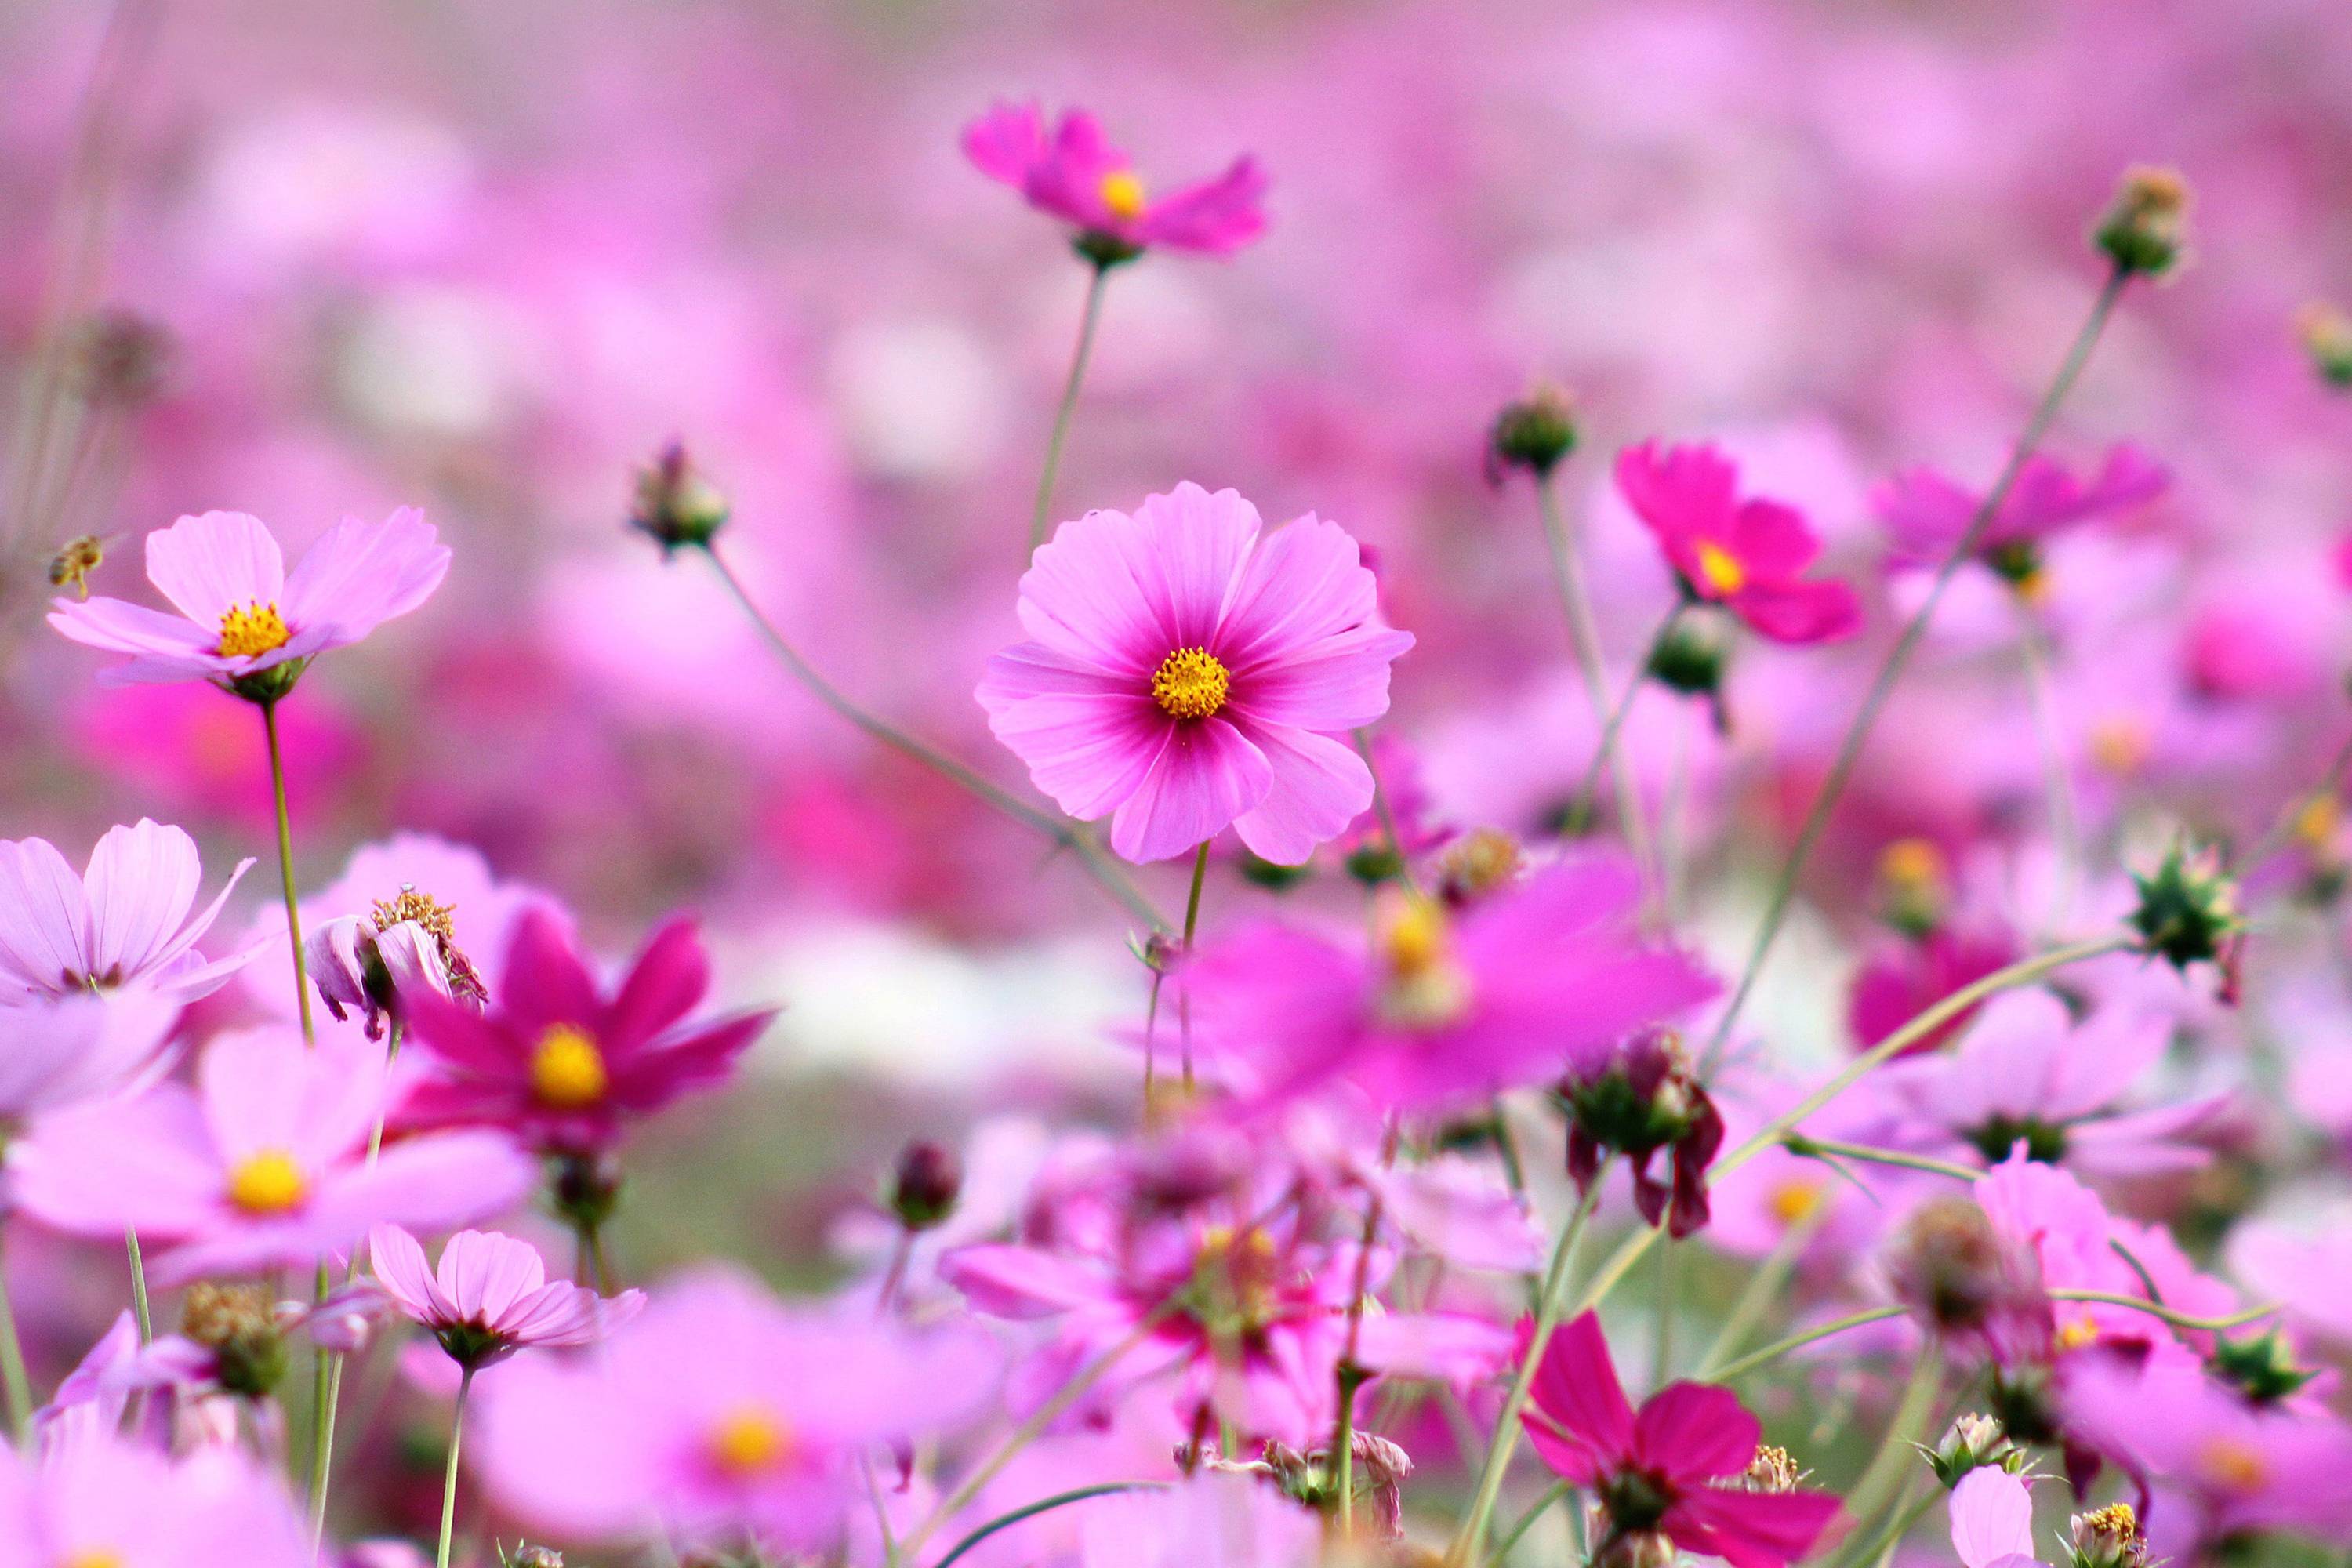 HD Wallpaper For PC Full Screen Flower FREE Picture